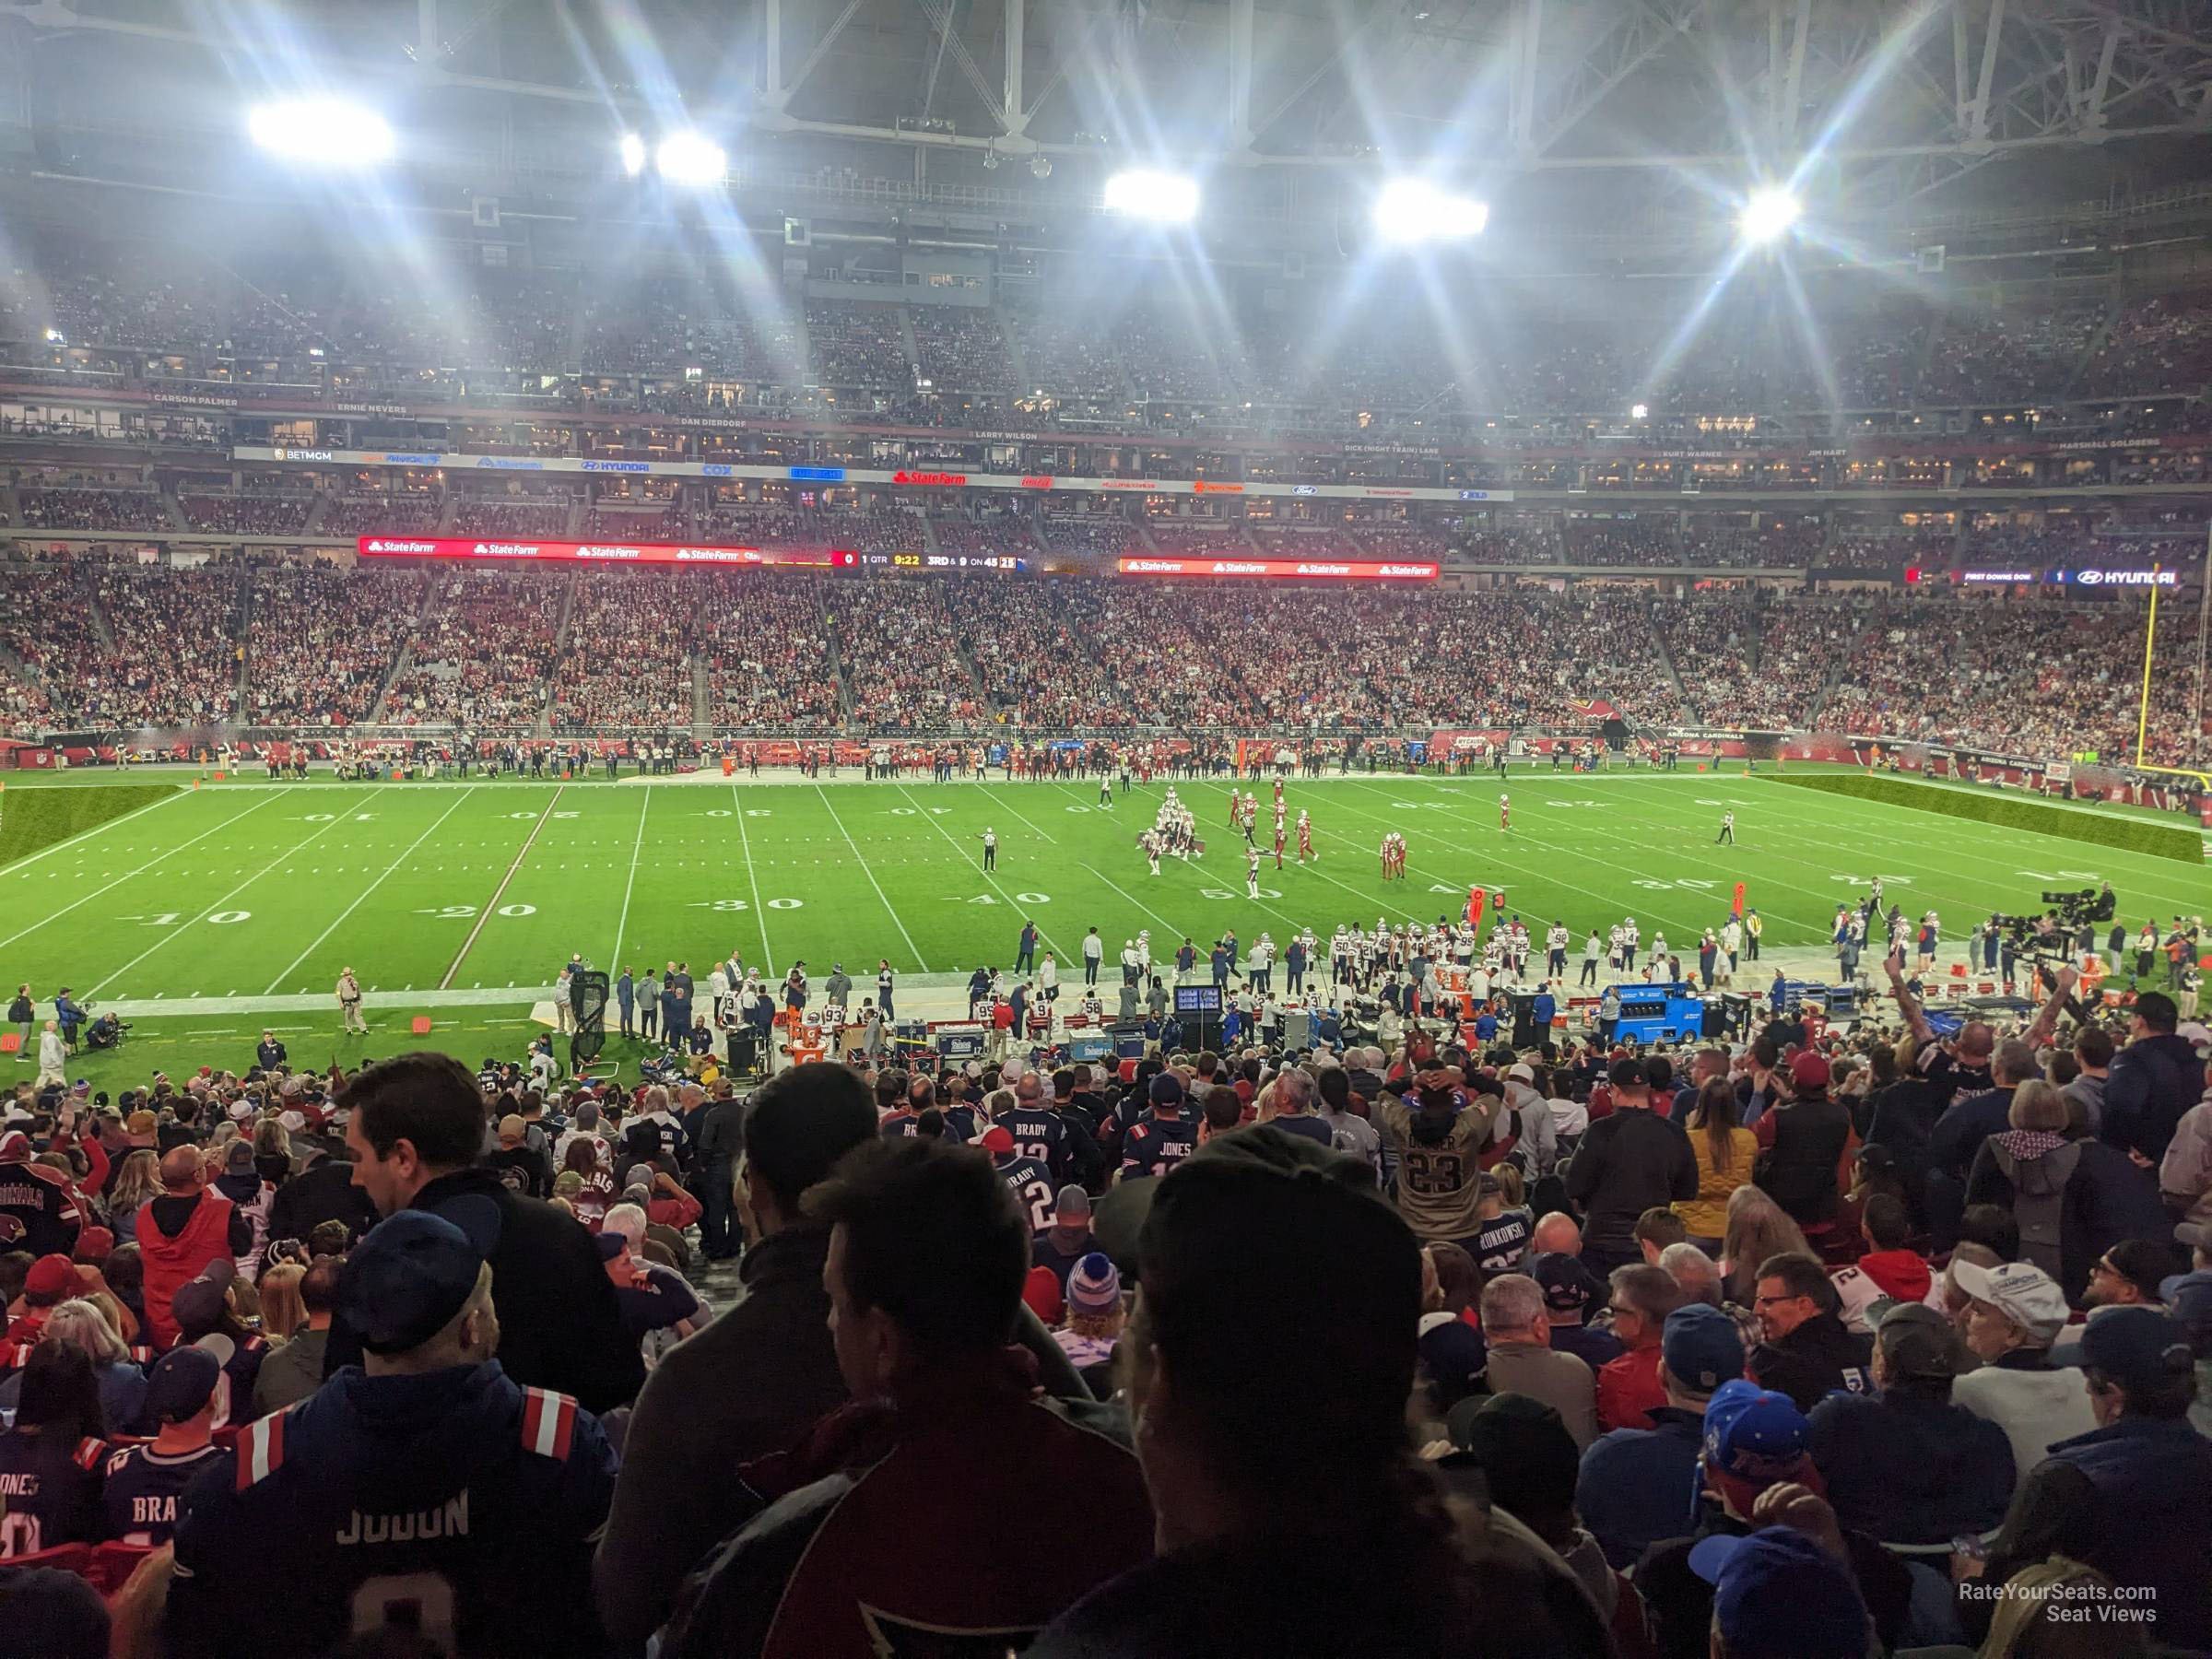 section 132, row 41 seat view  for football - state farm stadium